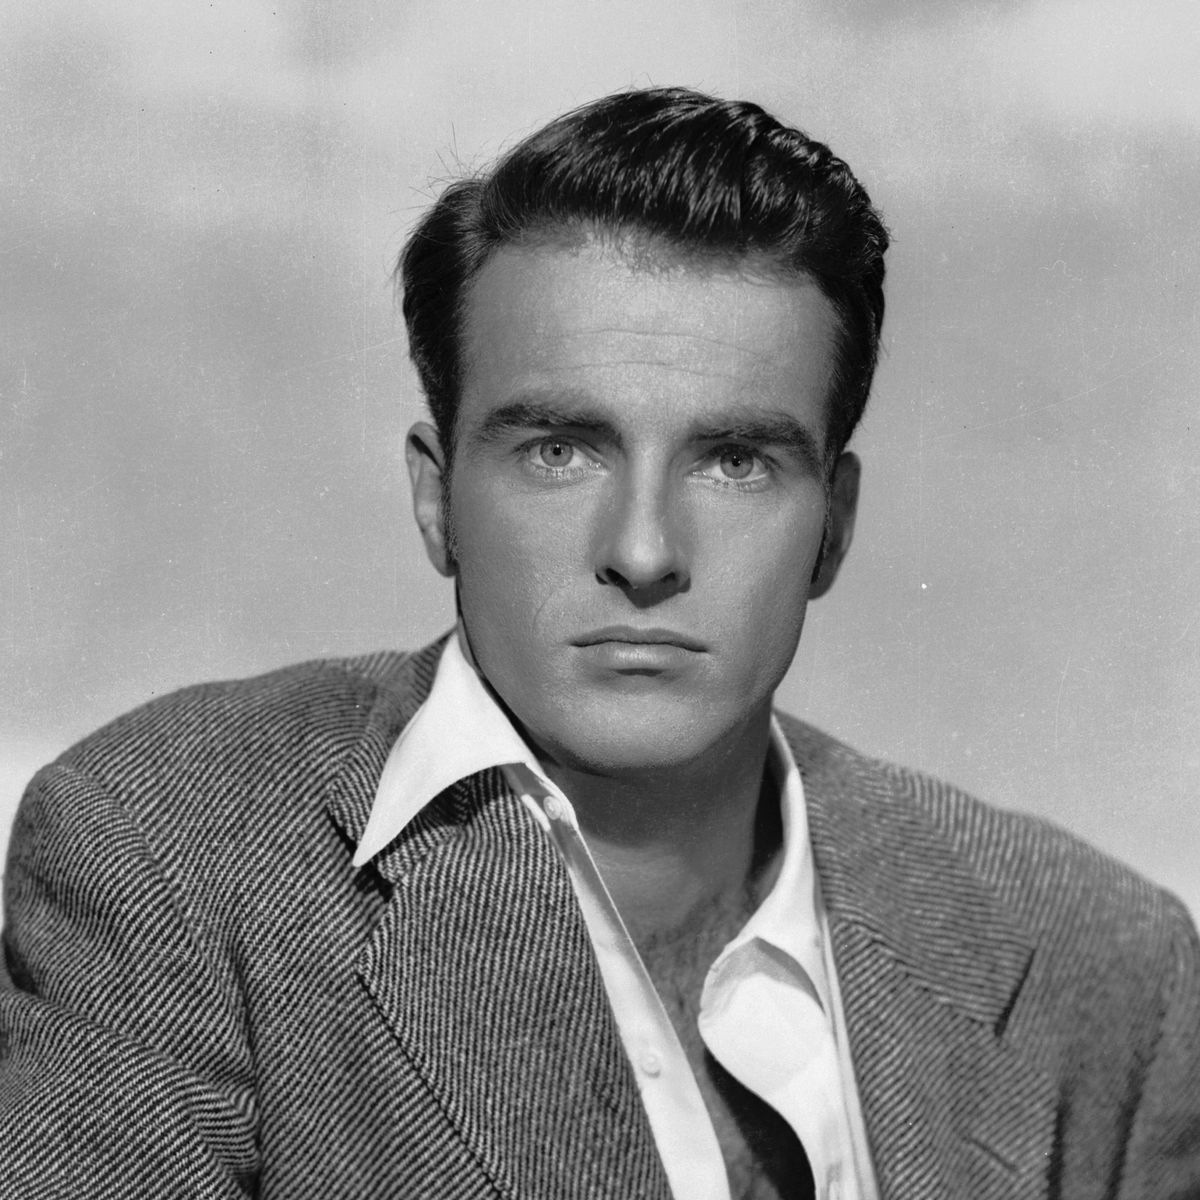 Montgomery circa 1950: American actor Montgomery Clift (1920 - 1966) leaning on a fence with an intent expression. (Photo via John Kobal Foundation/Getty Images)